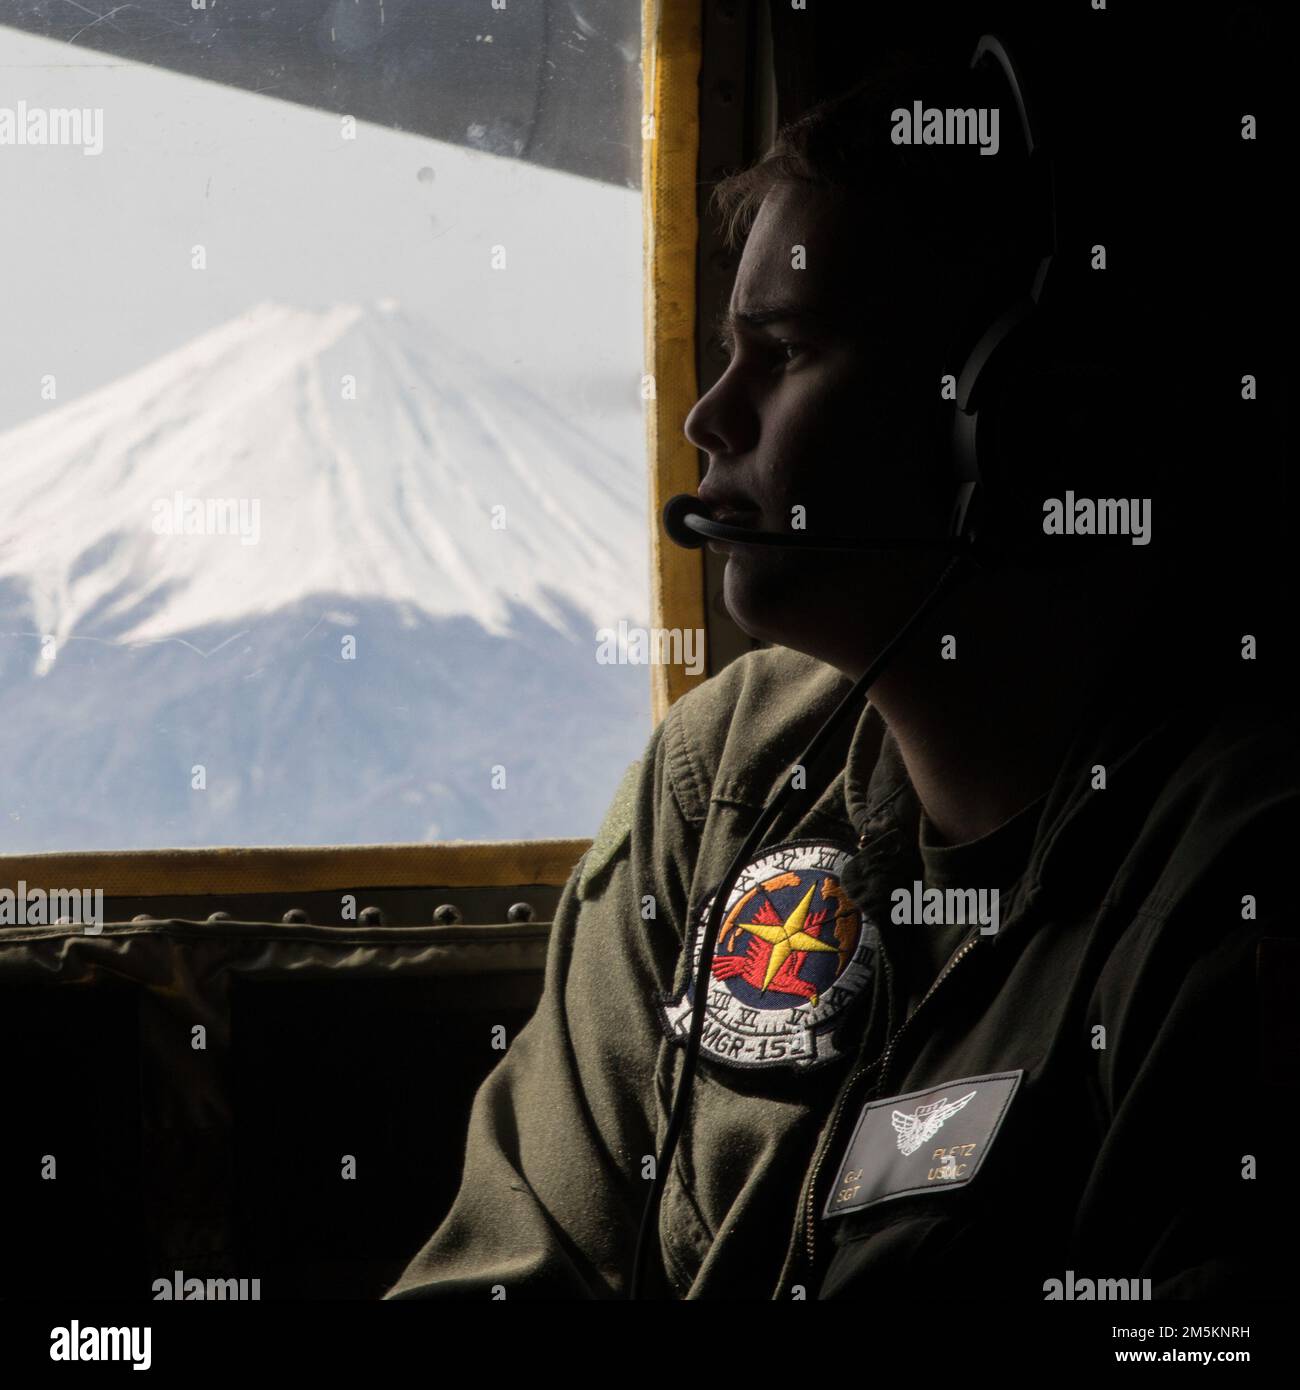 U.S. Marine Corps Sgt. Gabriel Pletz, a loadmaster with Marine Aerial Refueler Transport Squadron (VMGR) 152 observes the terrain from a KC-130J Super Hercules near Mt. Fuji, Japan, March 23, 2022. Marines with VMGR-152 supported Marines with Marine Fighter Attack Squadron 121 during a training flight simulating close air support at Camp Fuji, Japan. Marine Corps aviation routinely conducts training throughout the region to remain combat-ready in support of a free and open Indo-Pacific and to demonstrate our commitment to the Treaty of Mutual Cooperation and Security between the U.S. and Japan Stock Photo